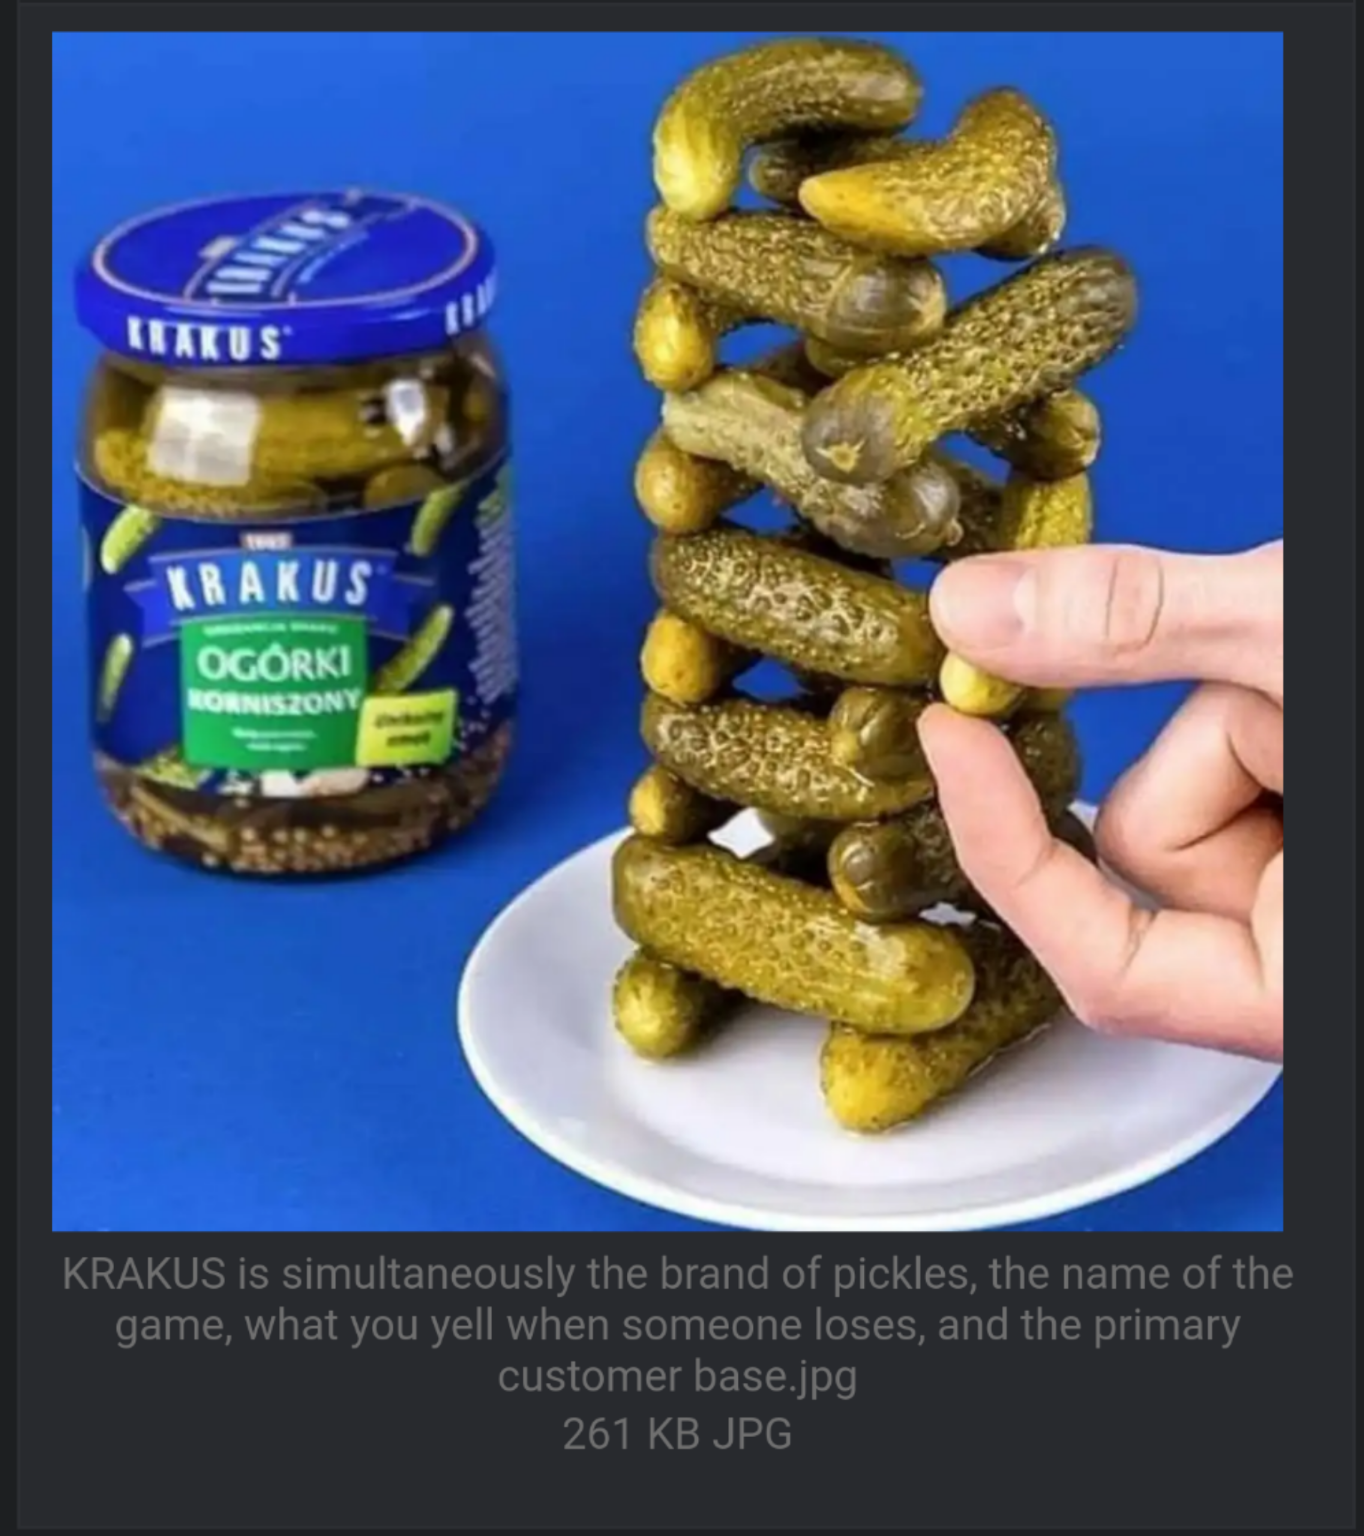 polish jenga - Luakus Trakus Ogrki Roszony Krakus is simultaneously the brand of pickles, the name of the game, what you yell when someone loses, and the primary customer base.jpg 261 Kb Jpg